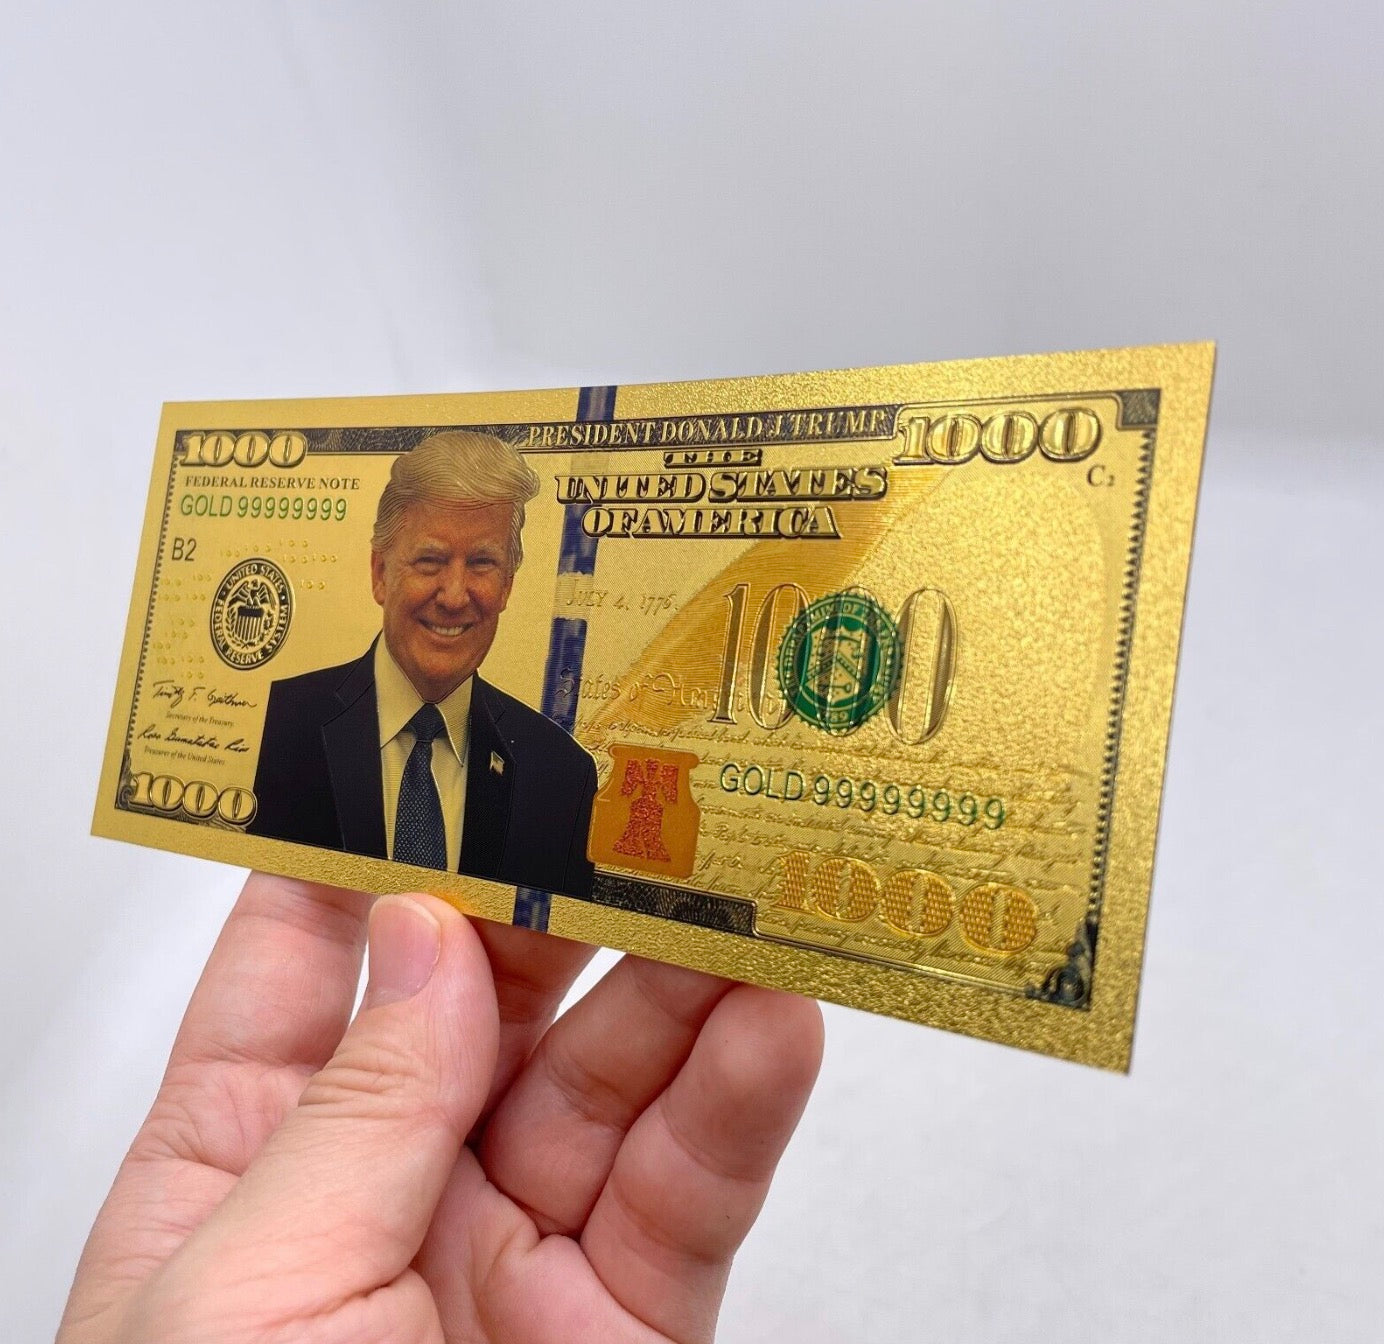 Official Trump $1,000 Banknote, 24k Gold Coated (3 Bills Per Order) — Just Pay Shipping